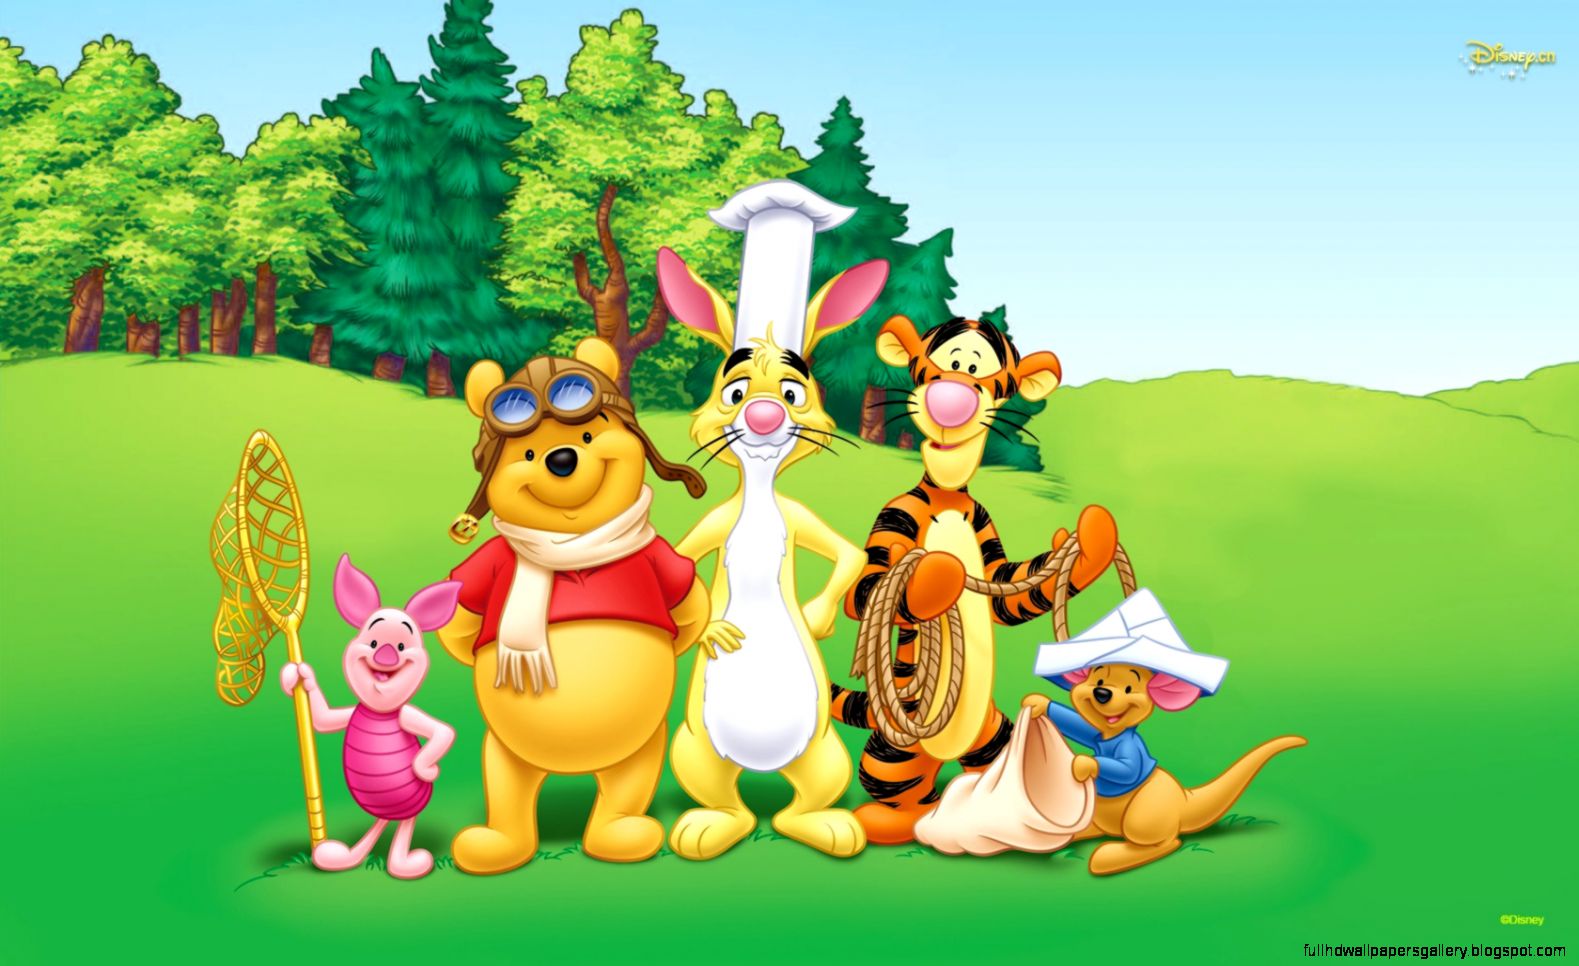 Winnie The Pooh Wallpaper Hd Images - Friendship Day Winnie The Pooh - HD Wallpaper 